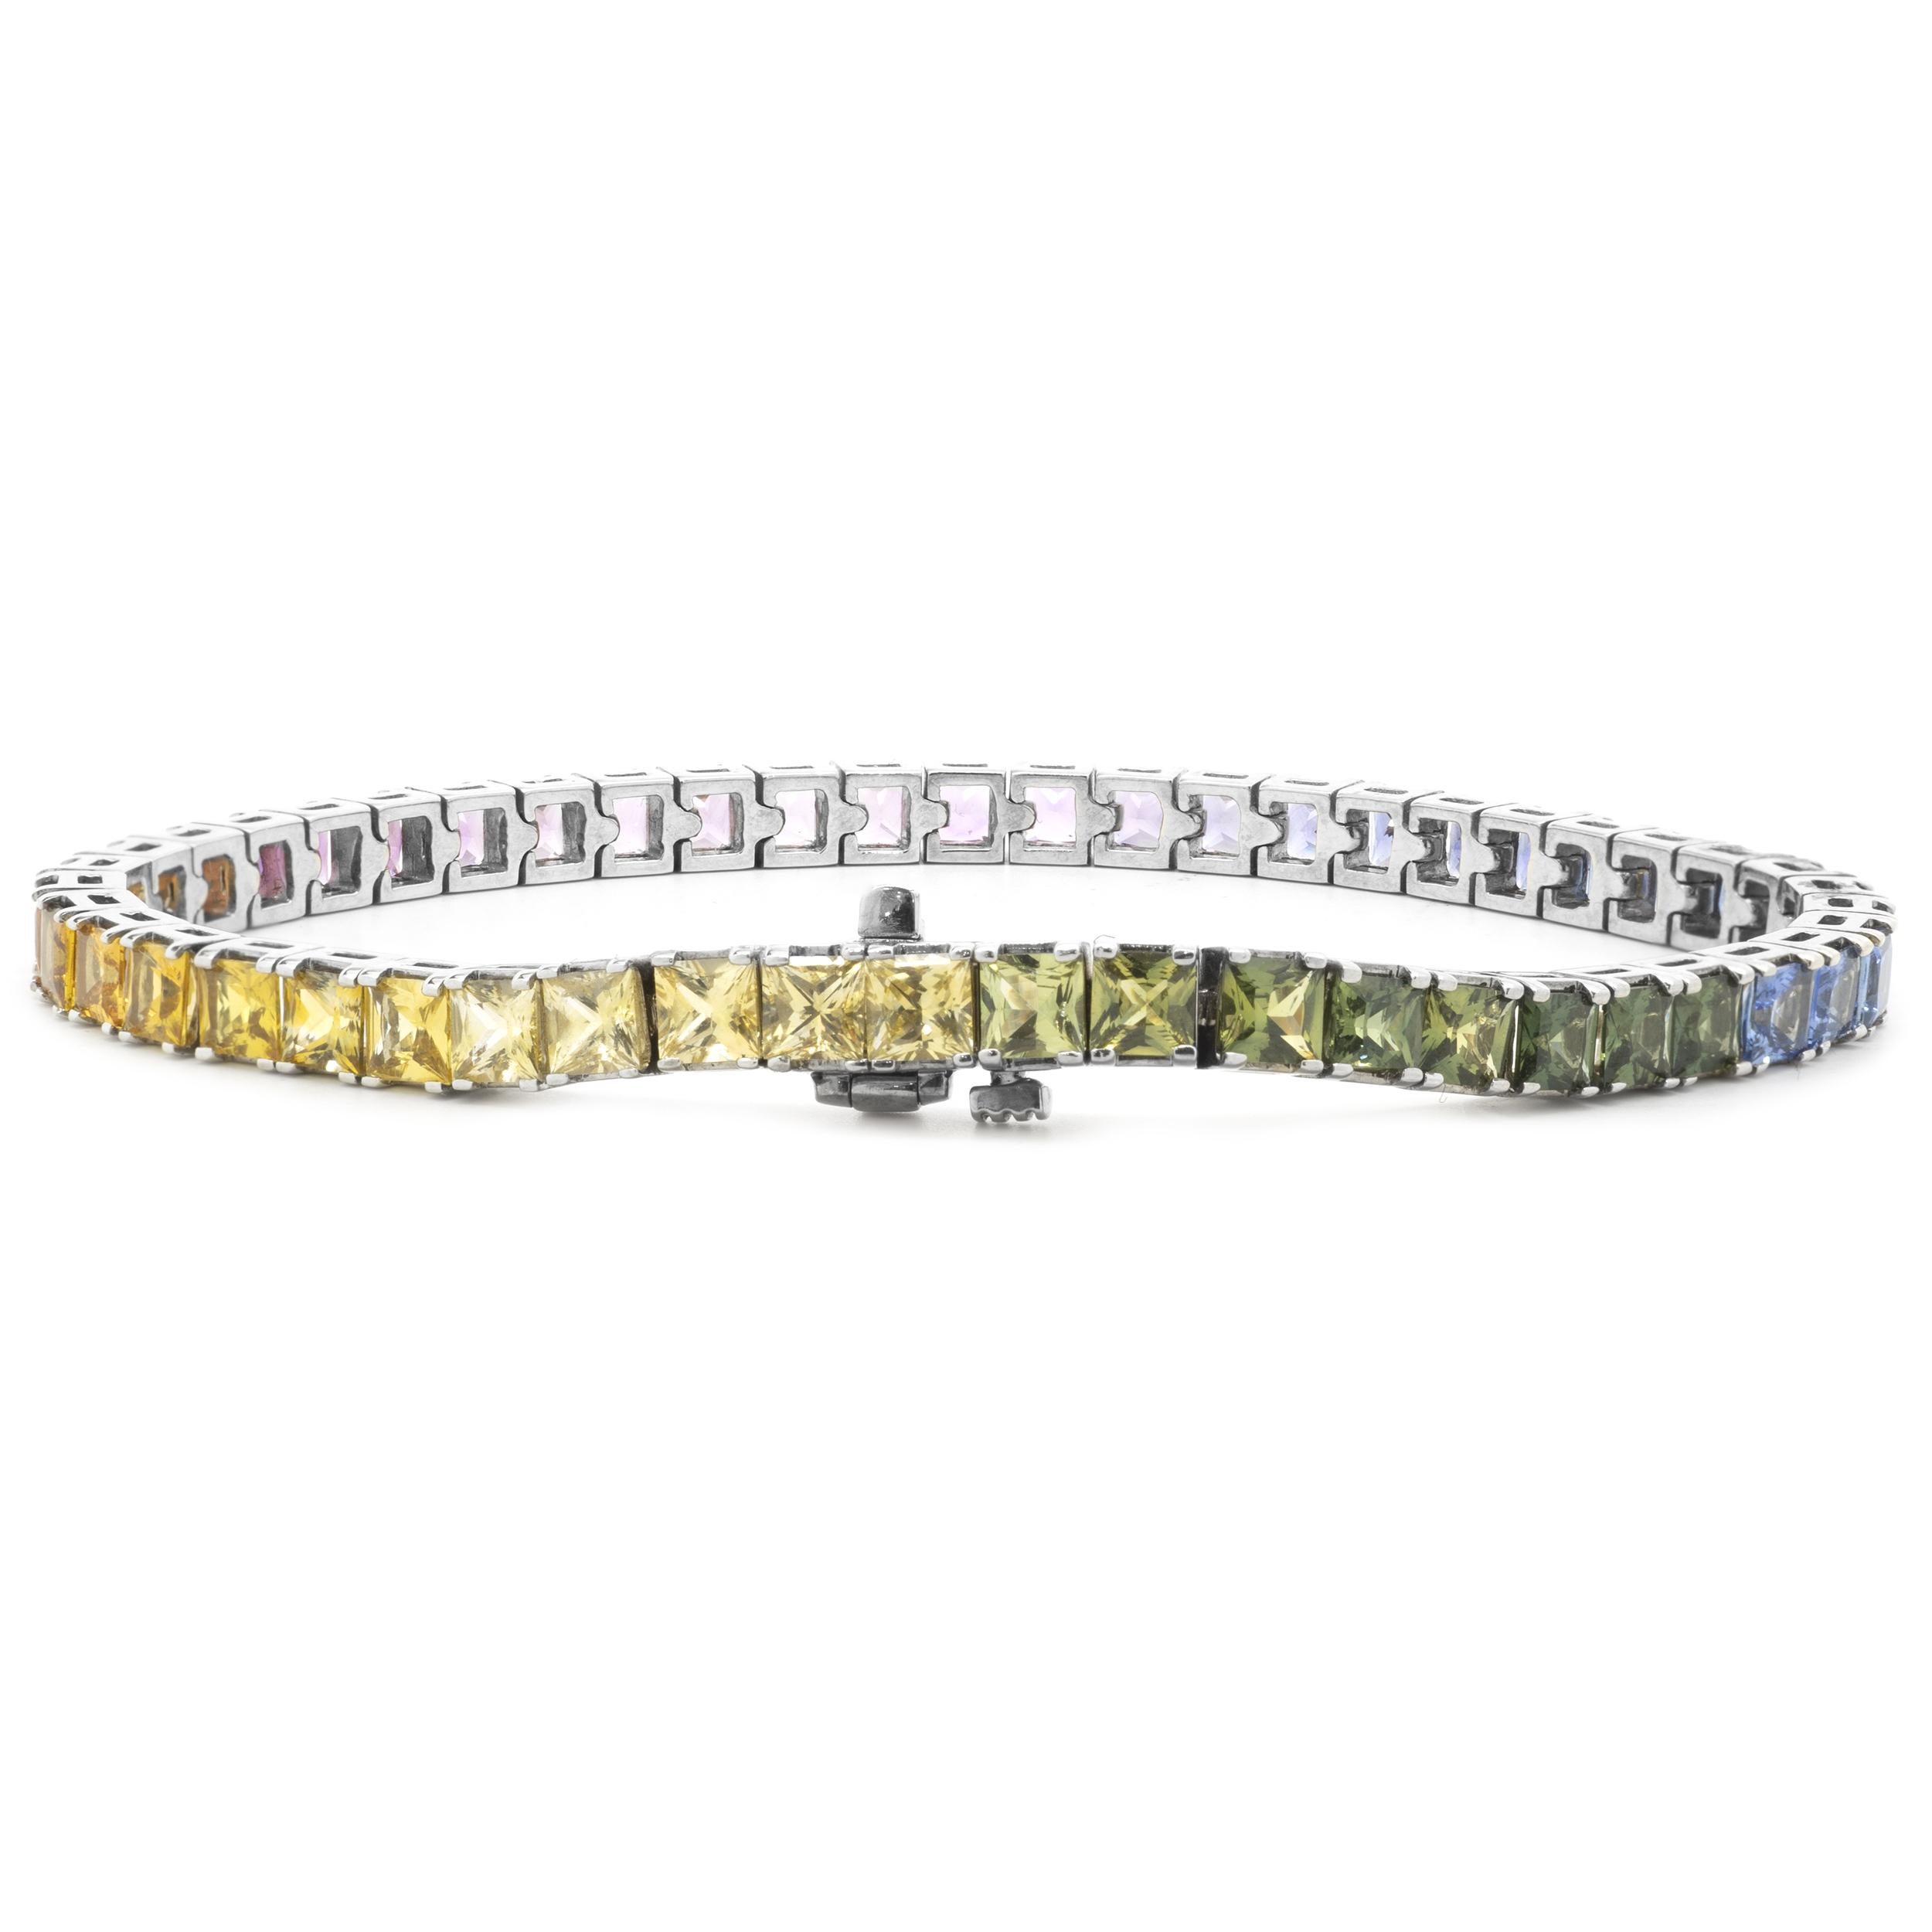 Material: 14K white gold
Sapphire: 49 princess cut = 14.70cttw
Color: Natural Rainbow Sapphires
Clarity: AAA+
Dimensions: bracelet will fit a 7-inch wrist
Weight: 14.70 grams
